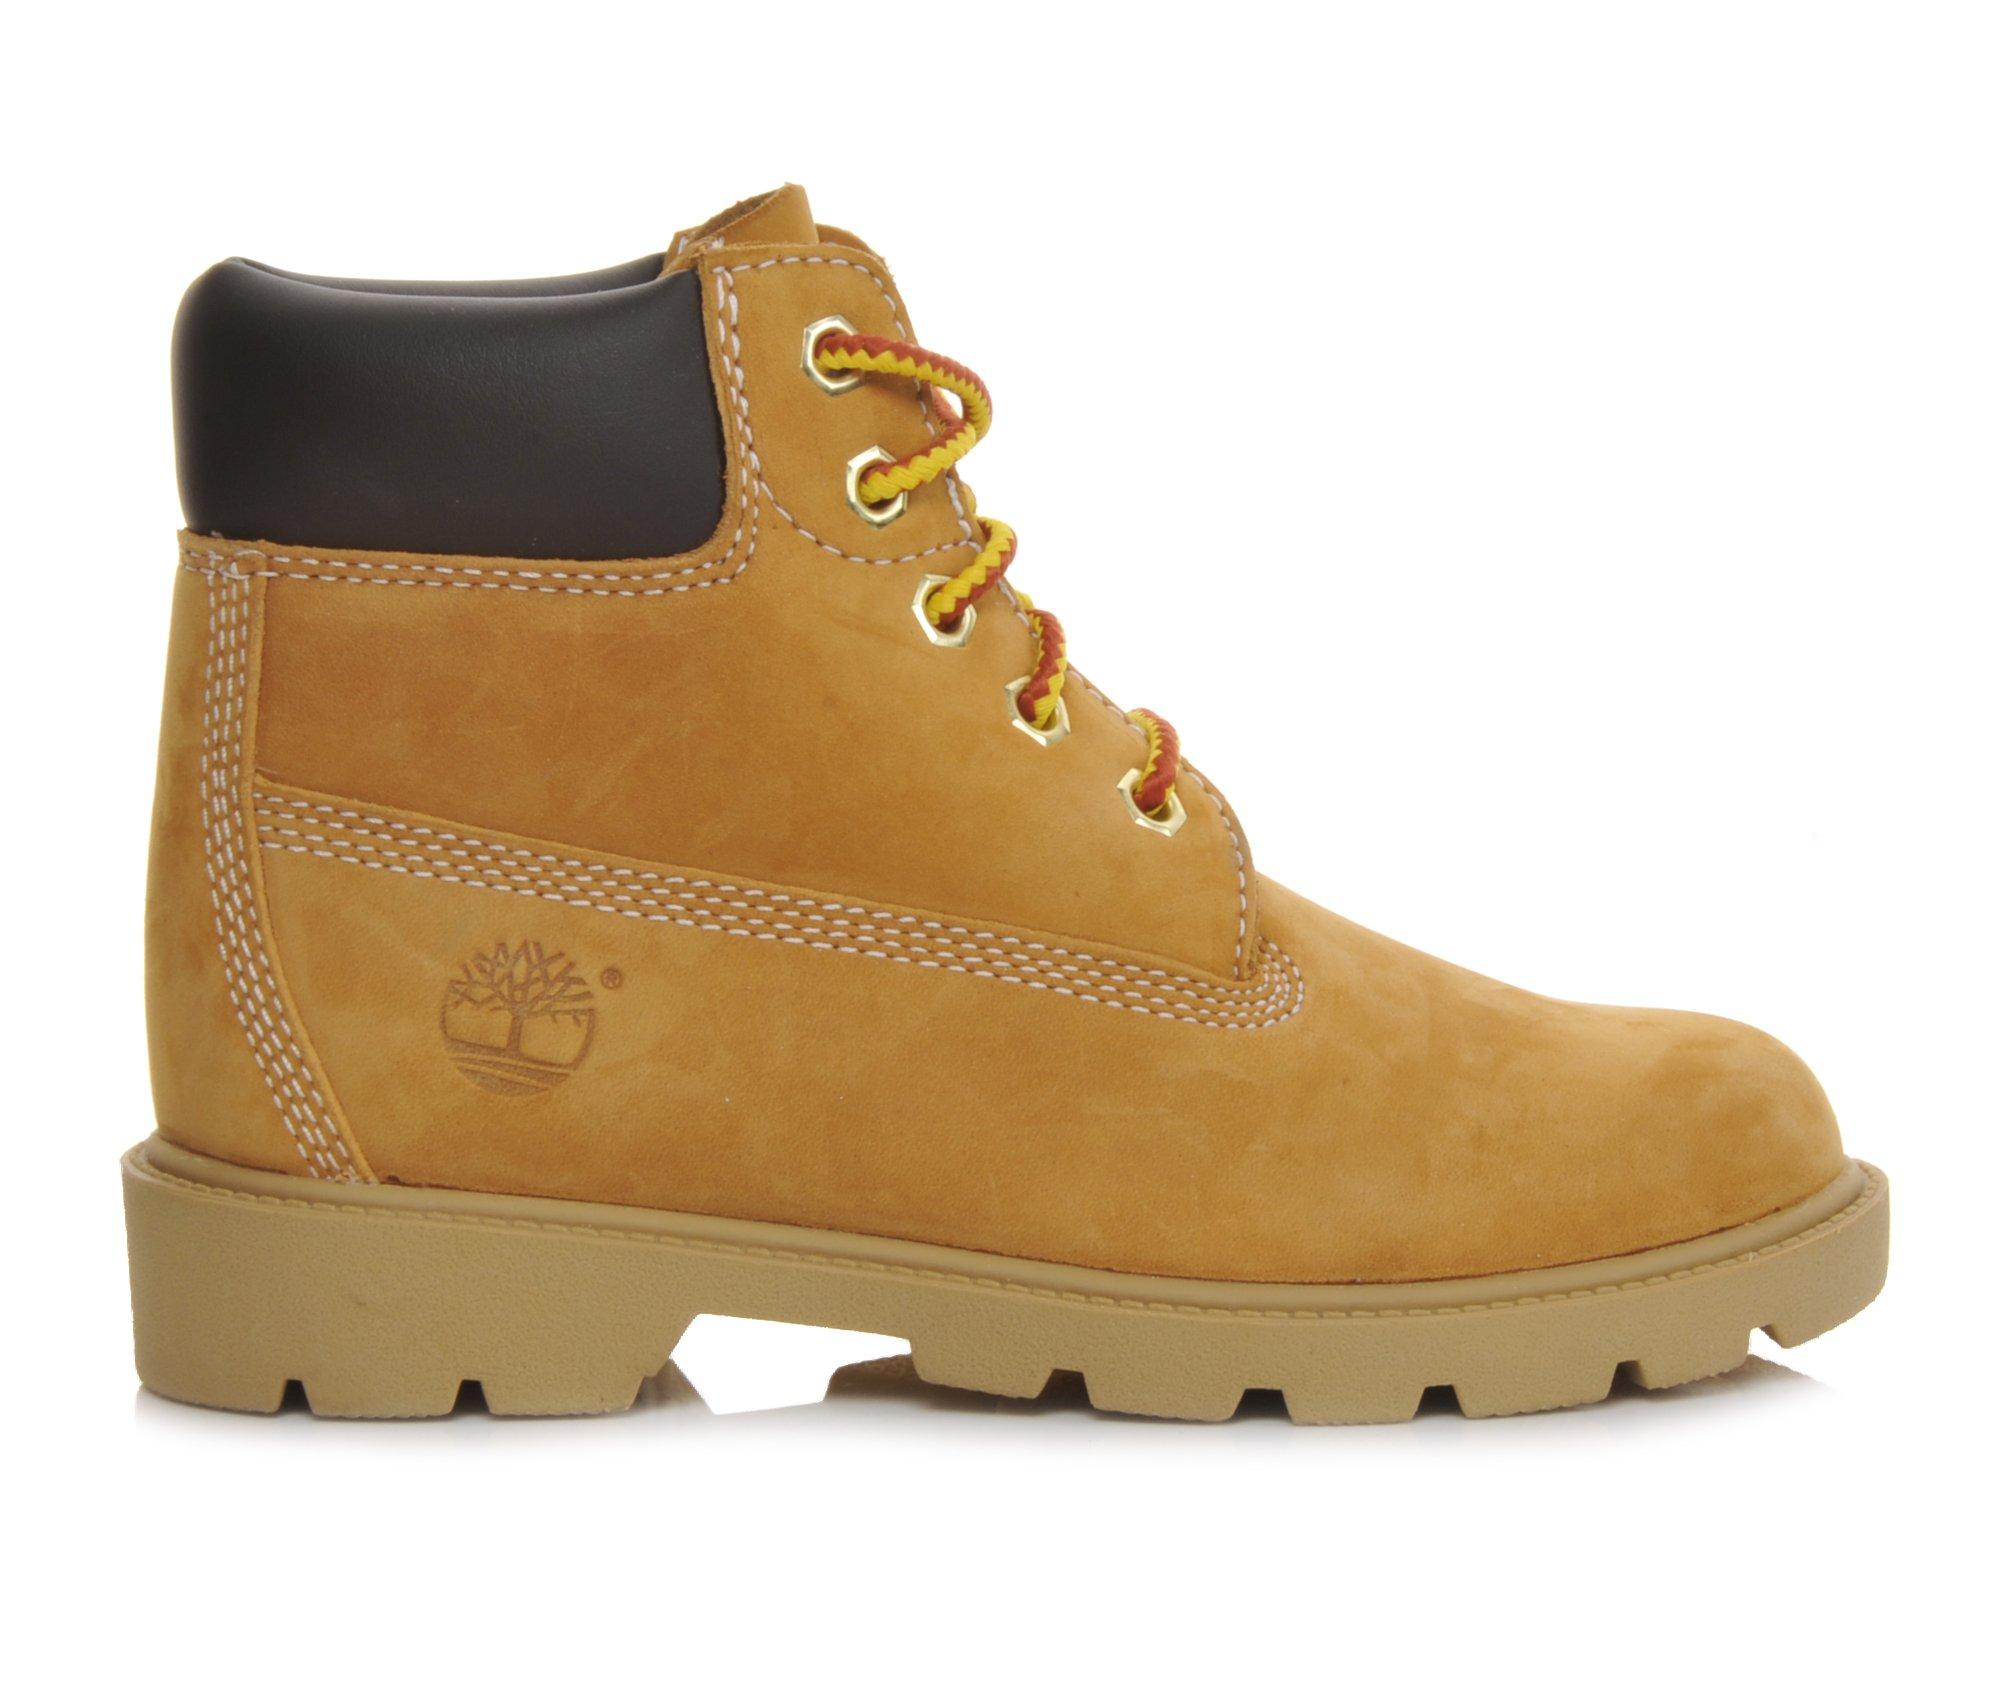 How Much Are Timberland Boots at Shoe Carnival?